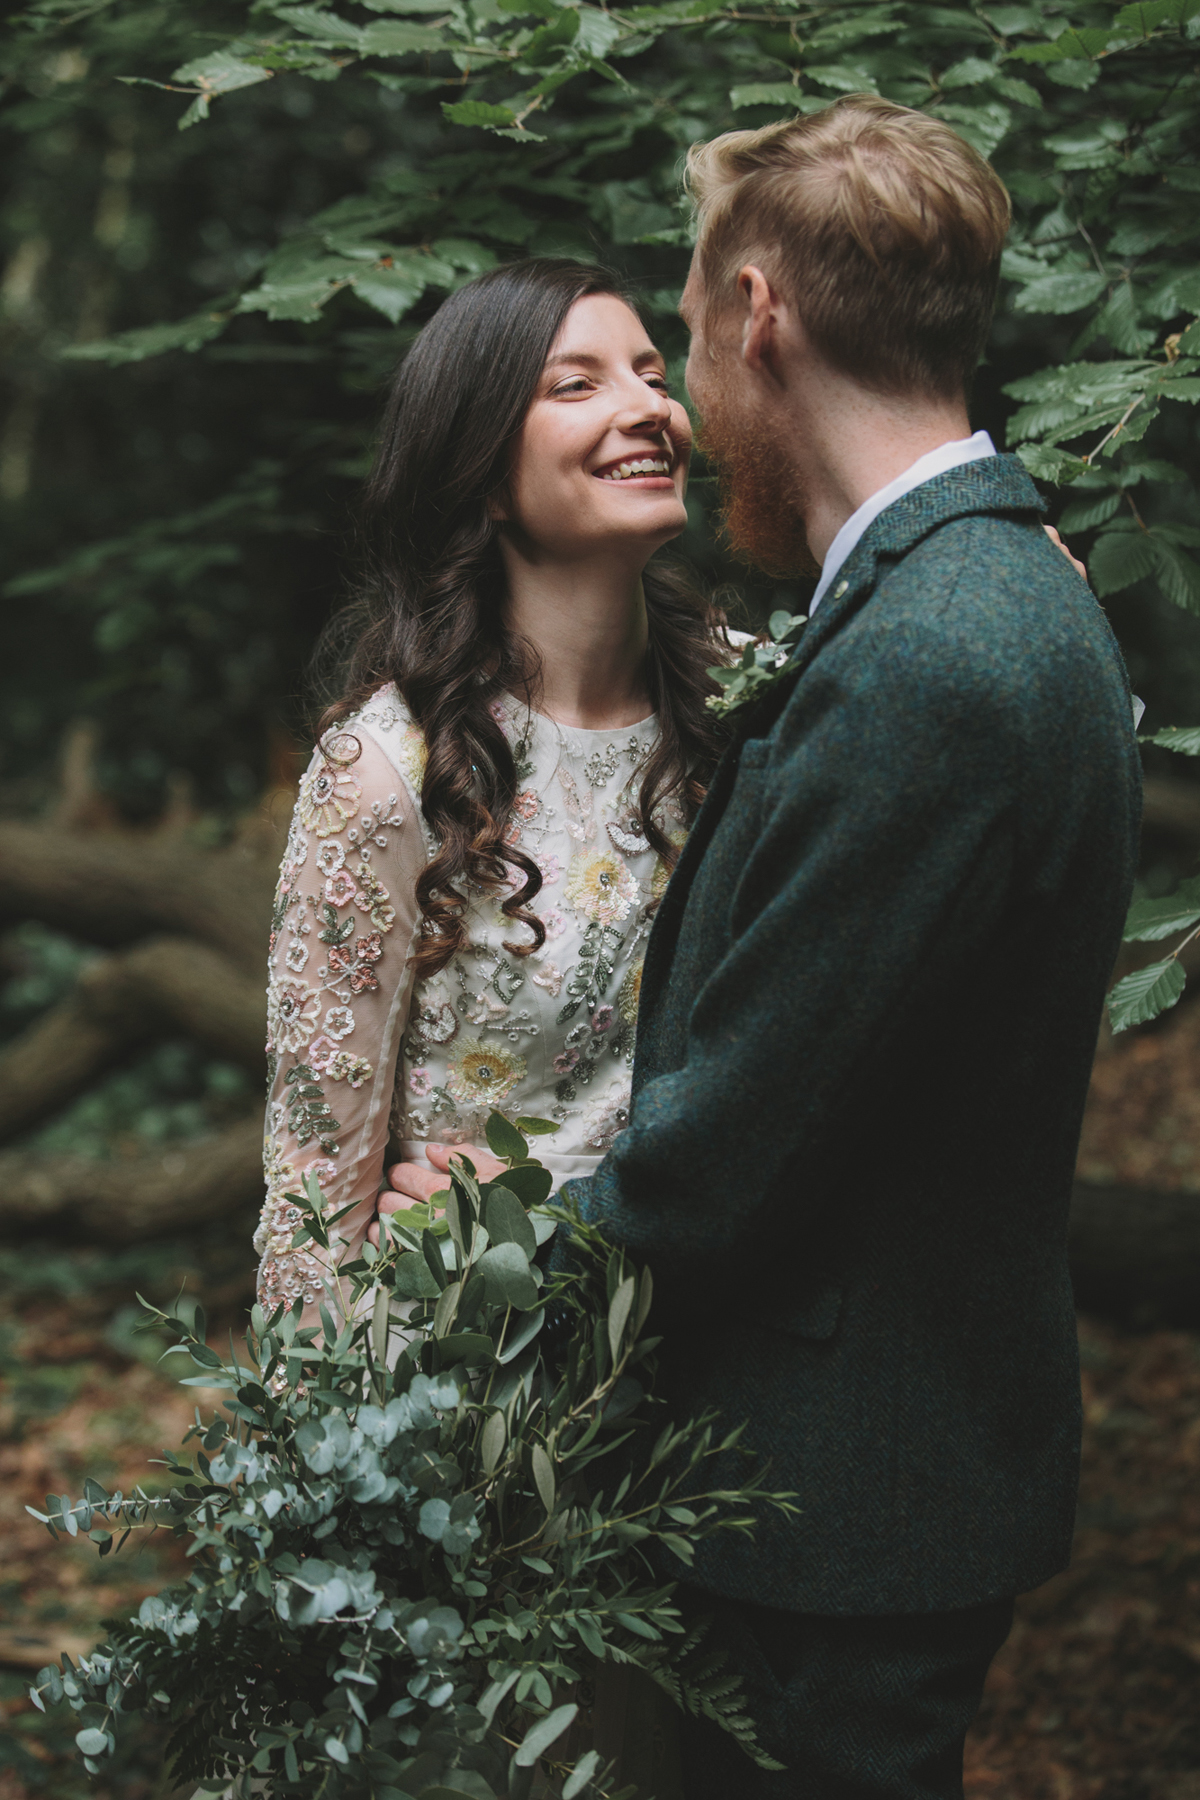 64 Bride in a Needle Thread gown and a Groom with a handlebar moustache and ASOS suit standing in woodland image by McKinley Rodgers